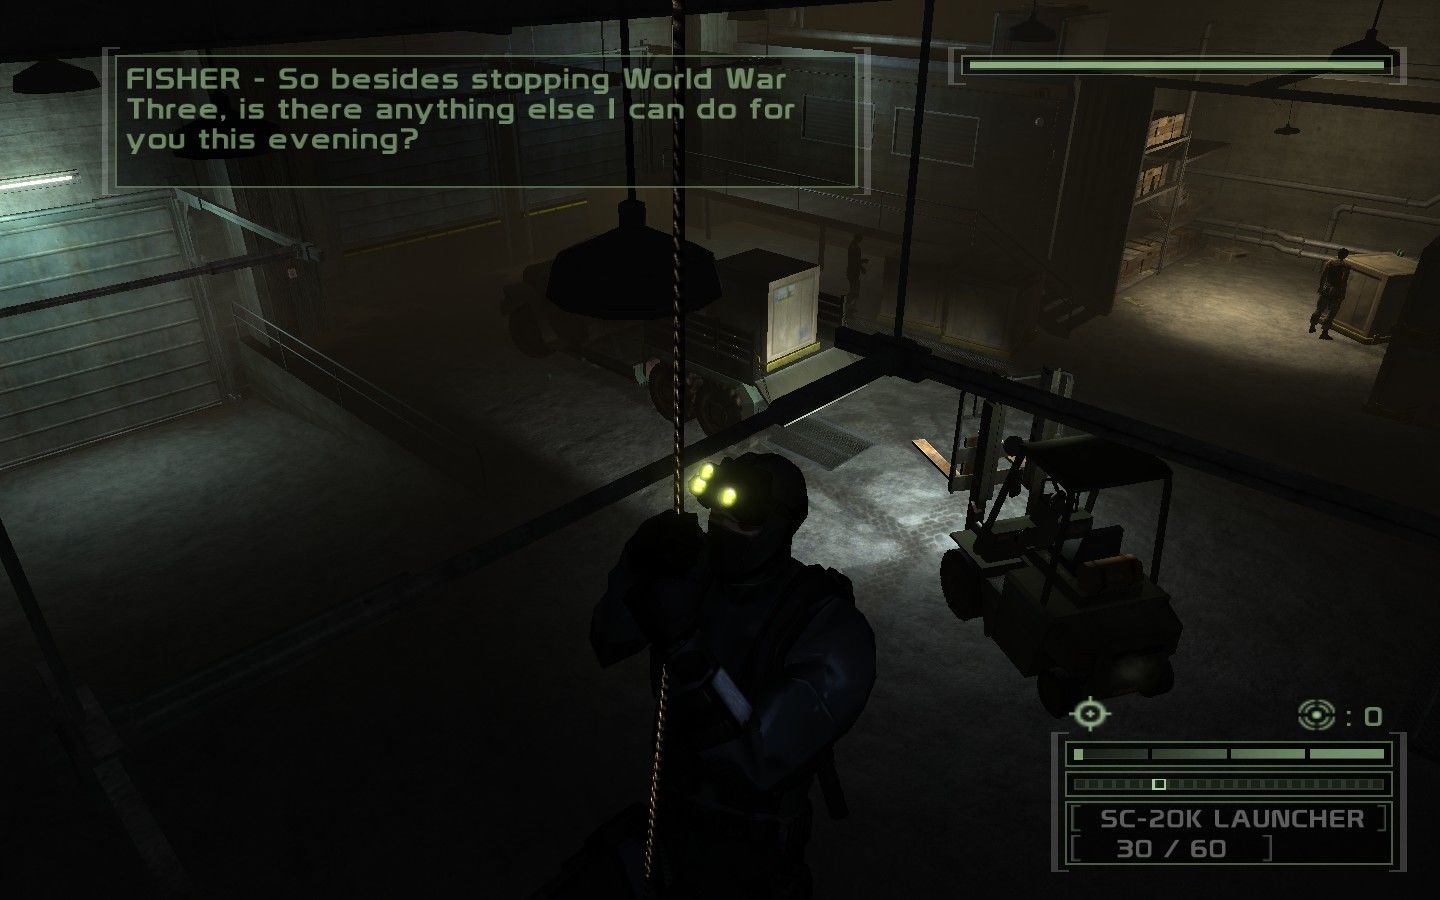 Tom Clancy's Splinter Cell: Chaos Theory - Lutris